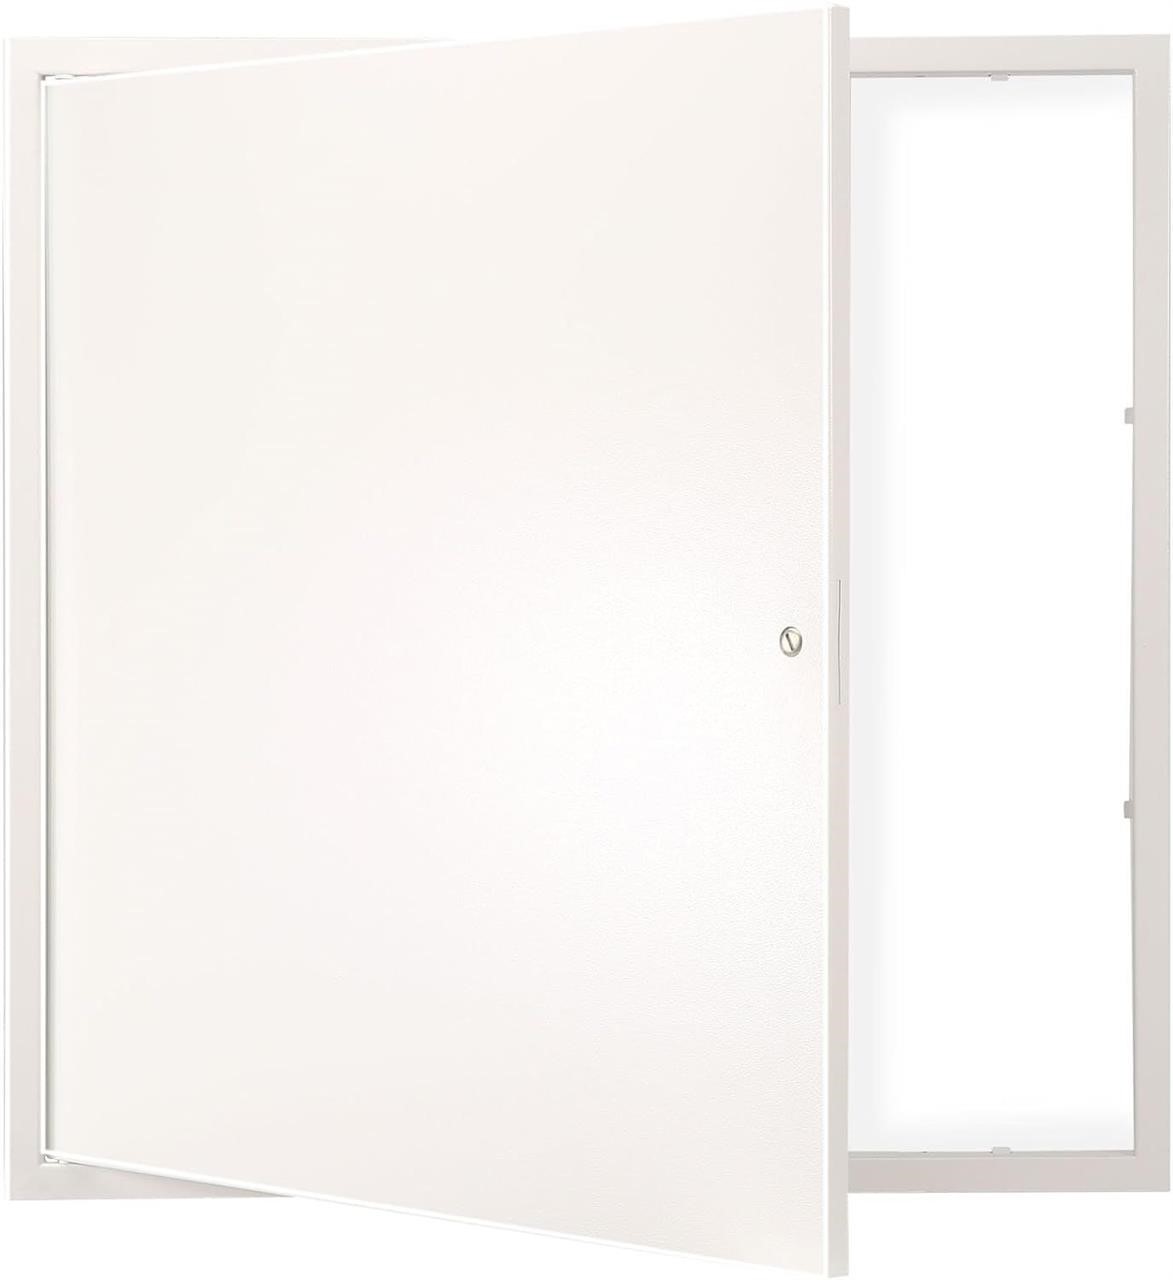 Metal Access Panel for Drywall Ceiling, 24 x 24